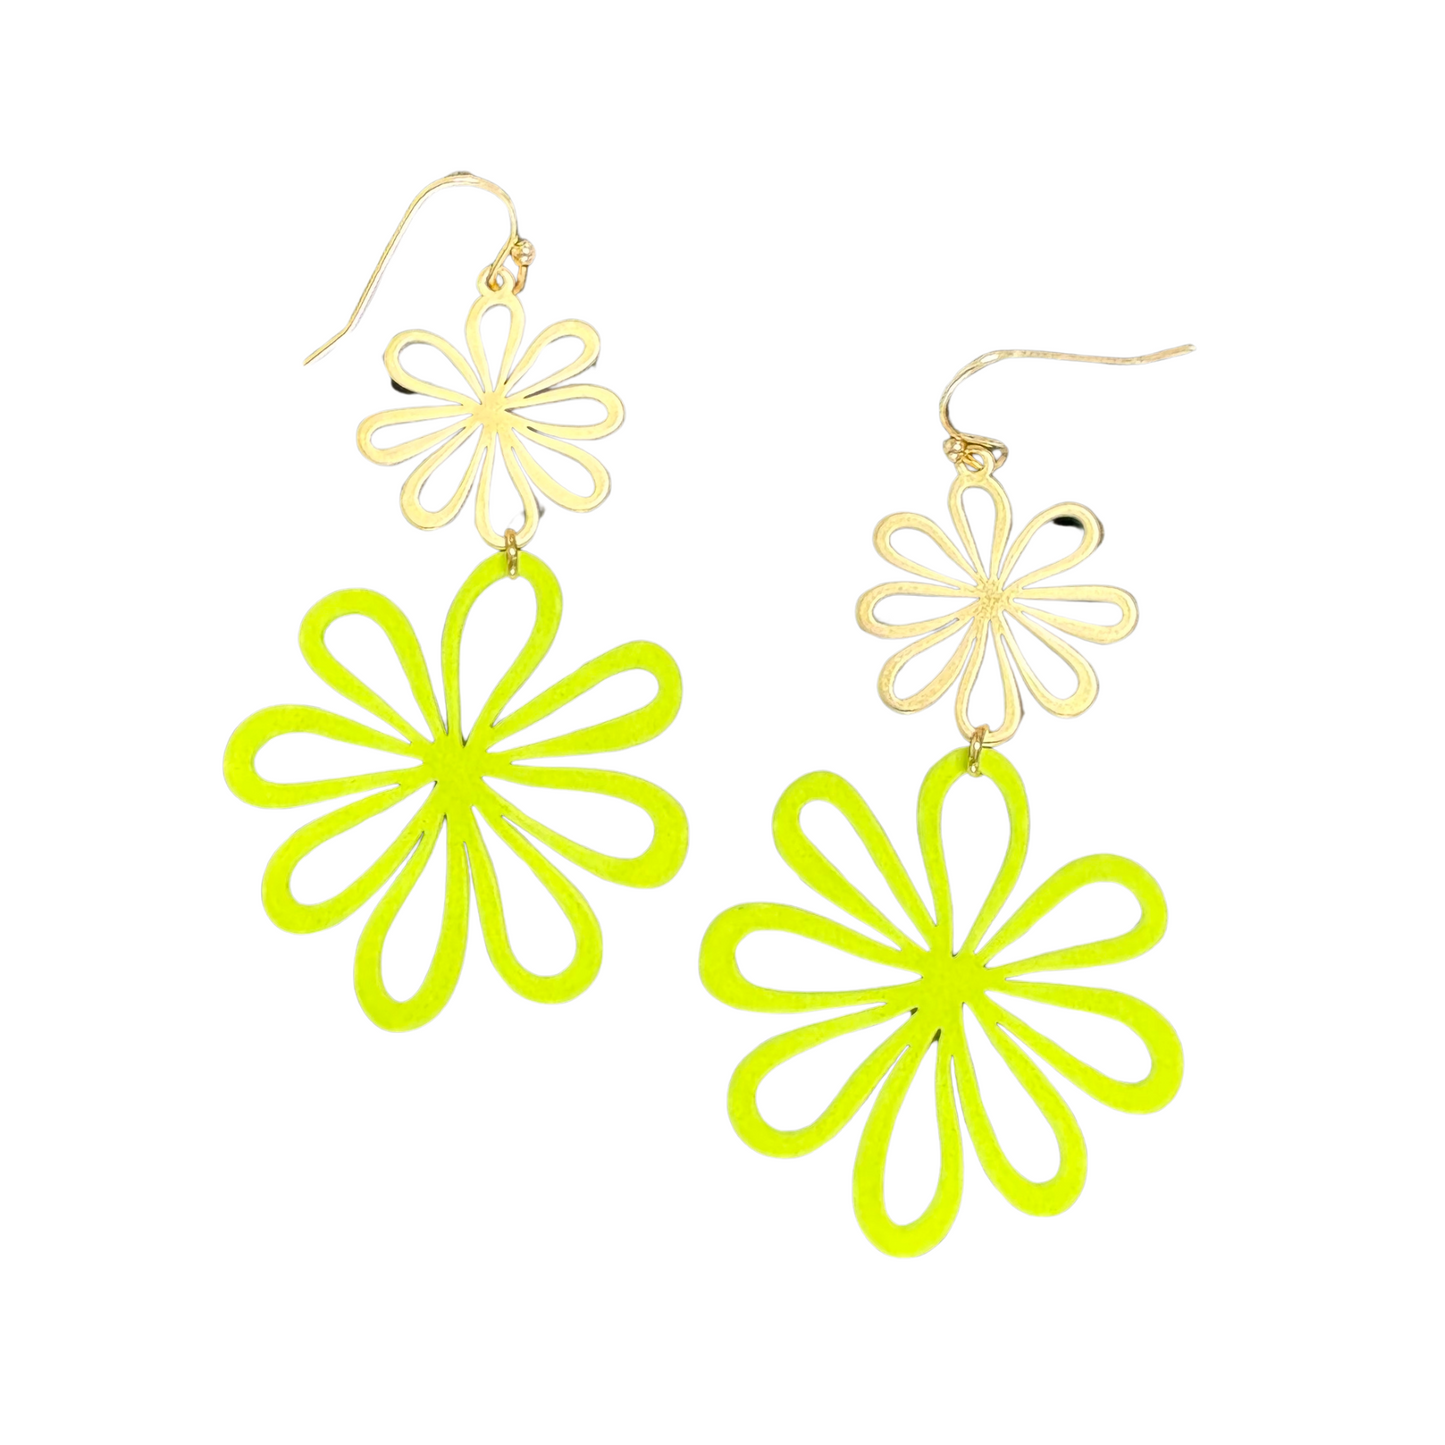 Double flower dangle earrings in gold and lime green